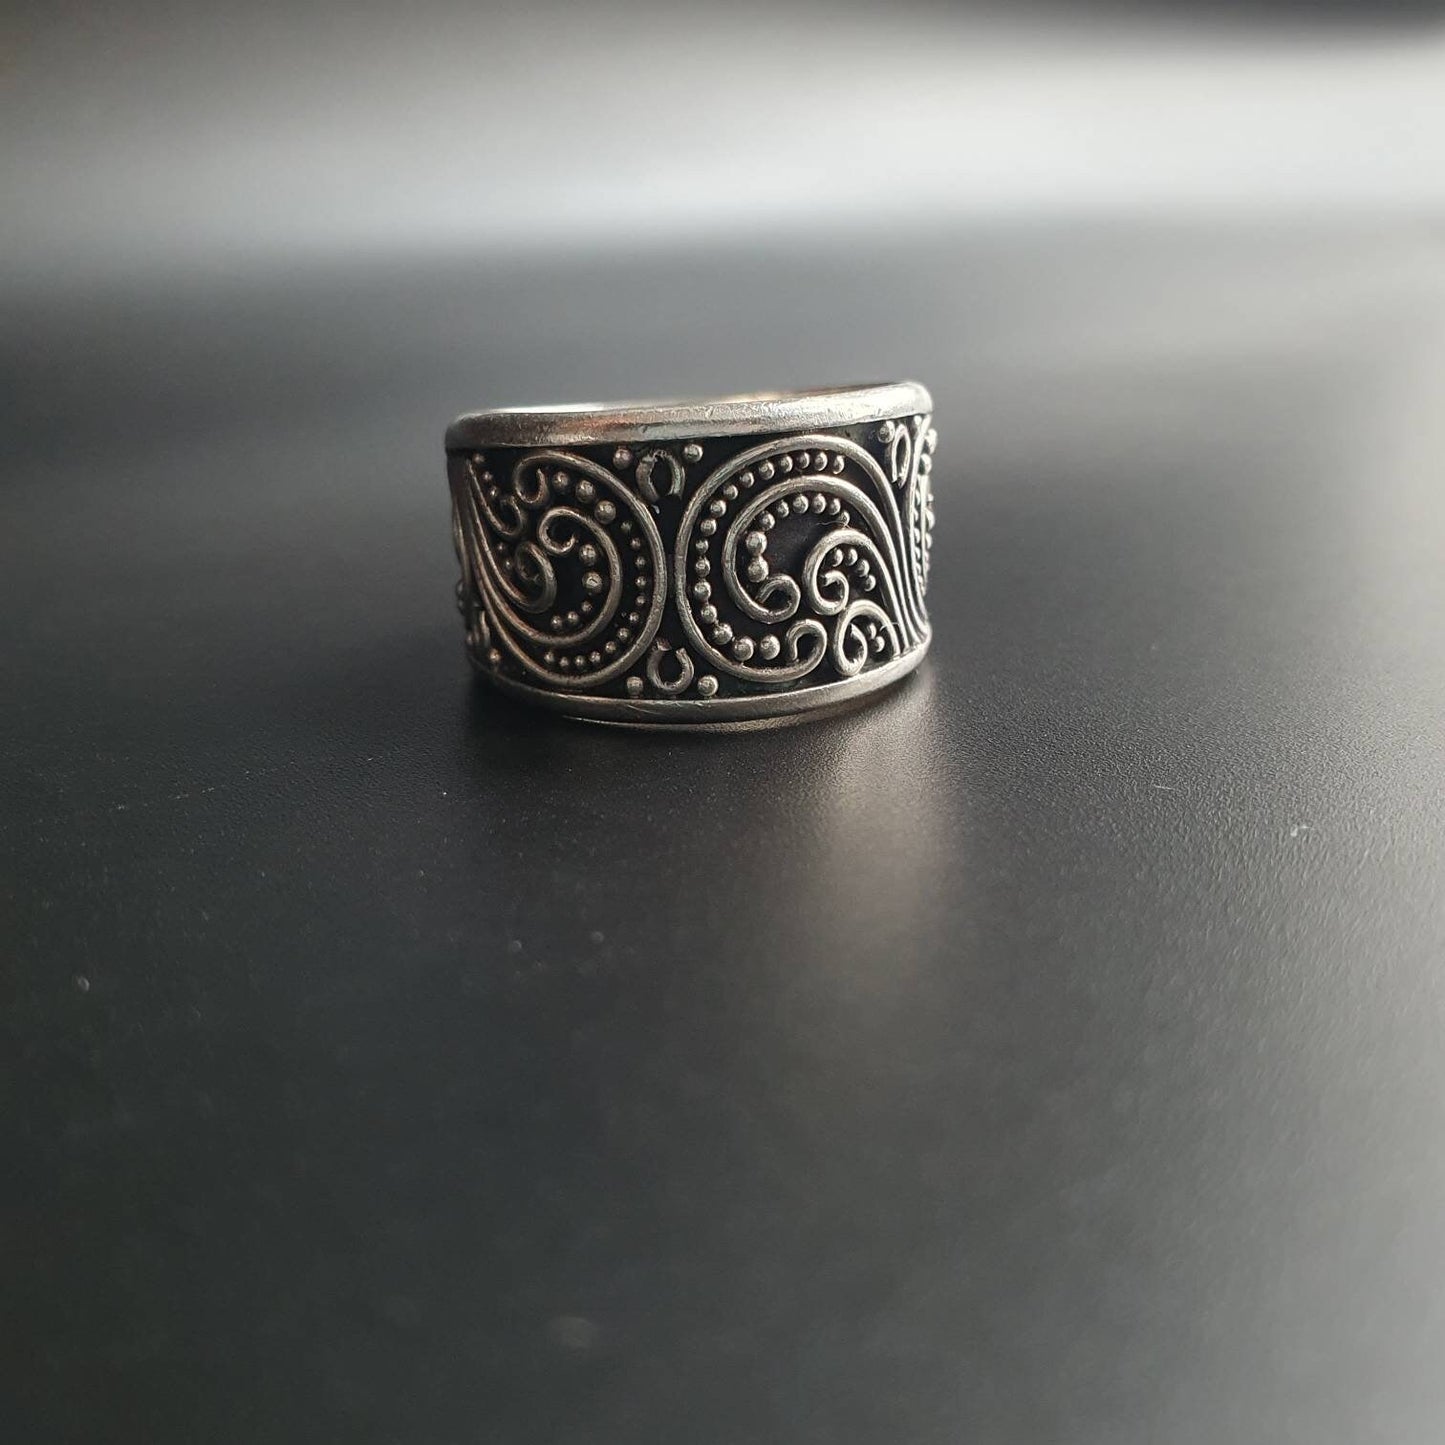 Band ring, suarti ring,suarti jewellery, filigree ring, sterling silver ring, statement ring, Unisex ring, mens rings, band ring, thumb ring